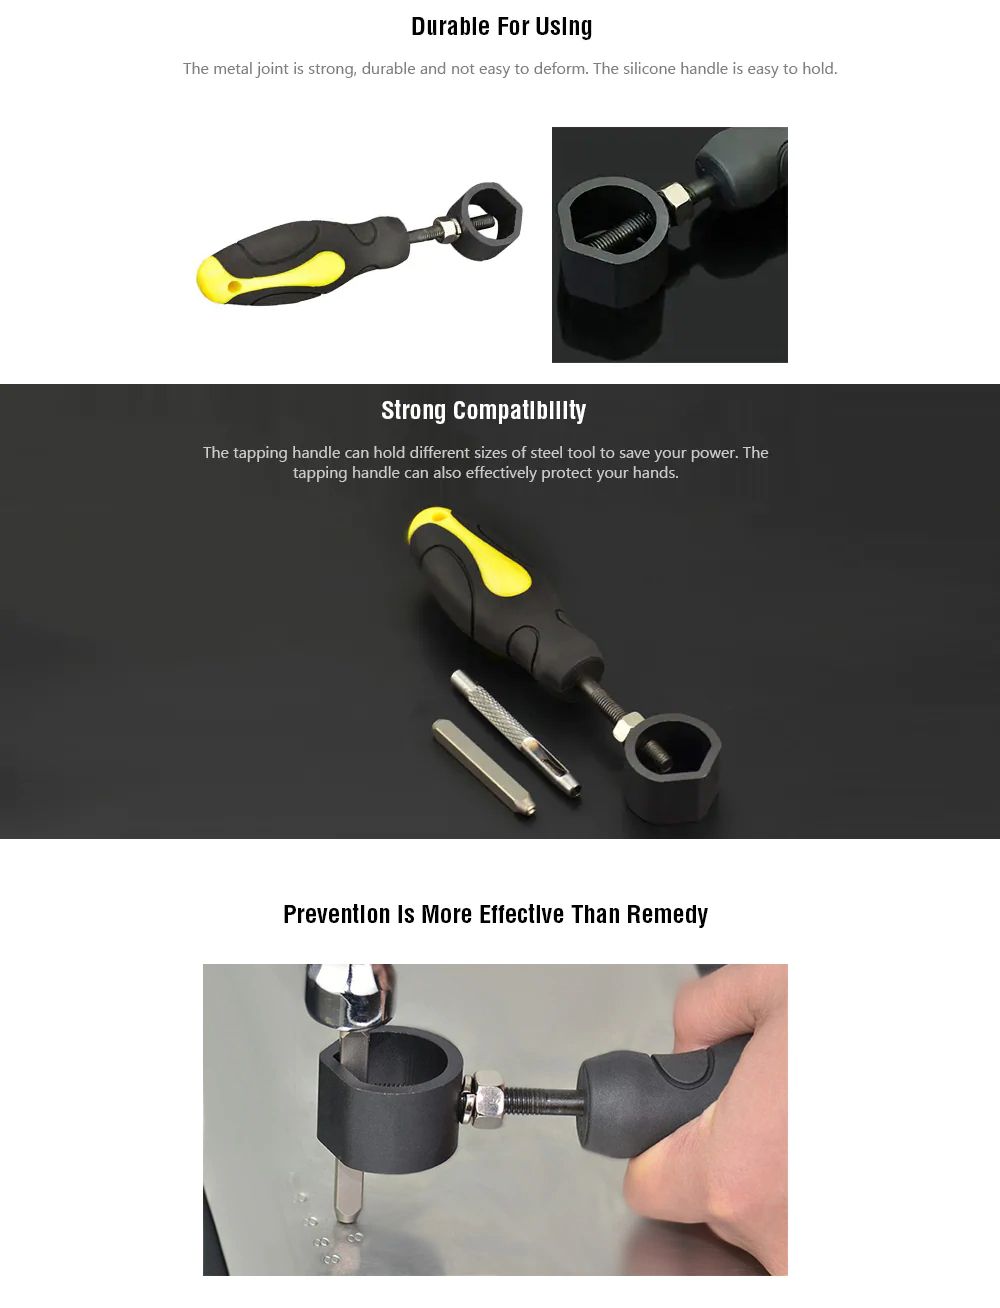 Universal--Multifunctional-Safety-Knocking-Puncher-Holder-Tapping-Handle-Suitable-for-15mm-25mm-1355647